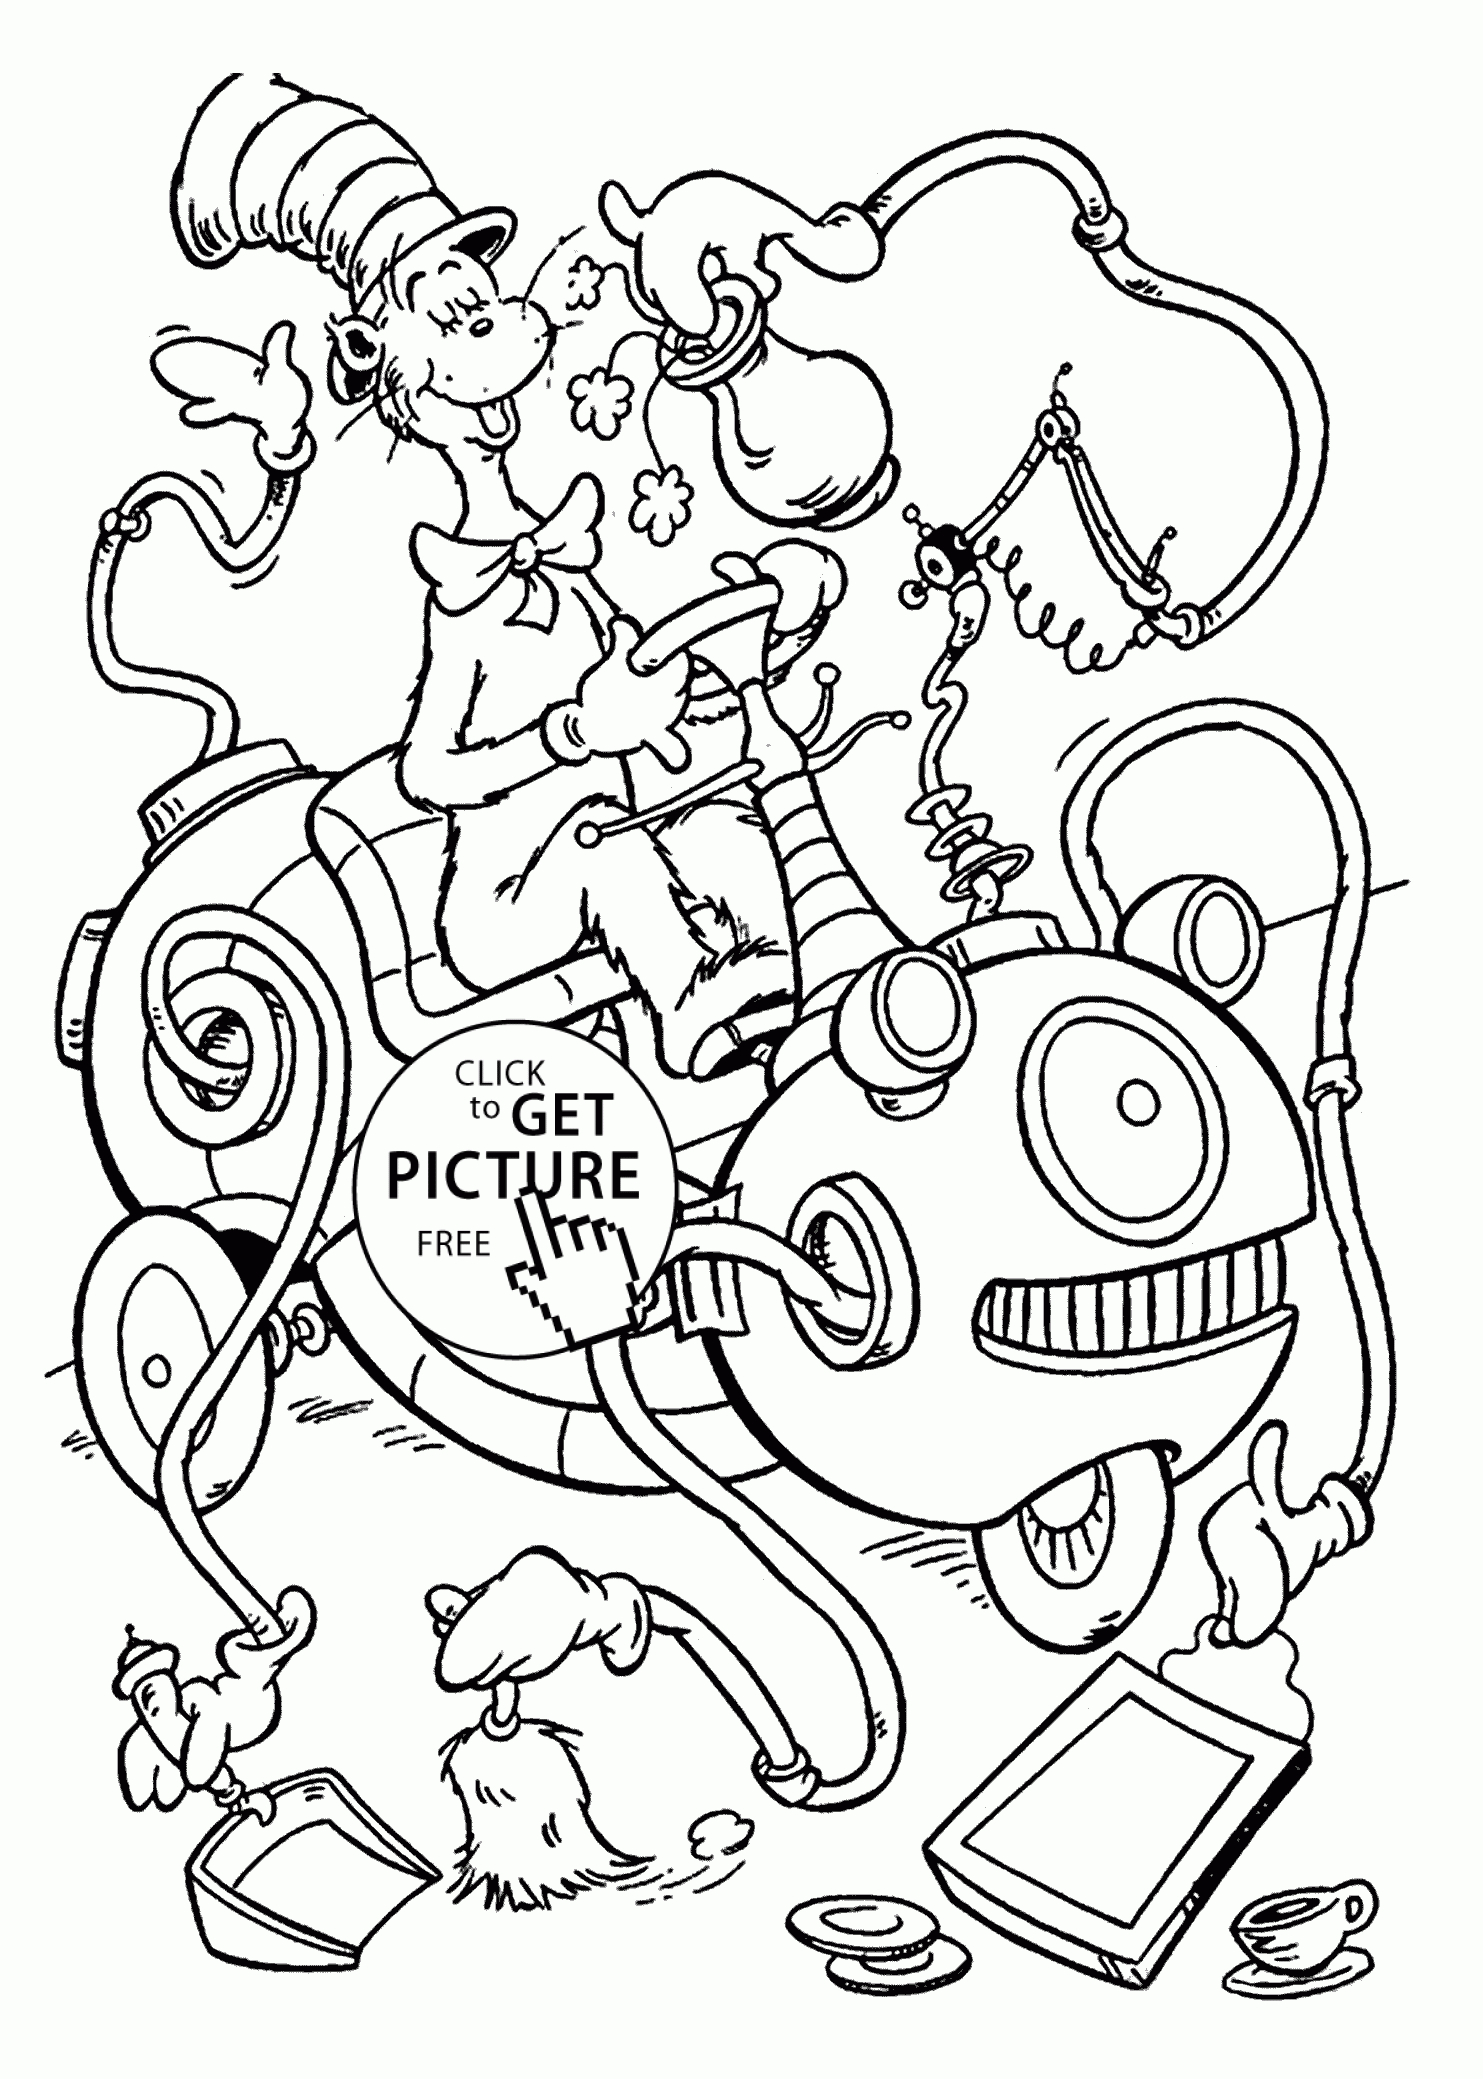 Сat In The Hat And Maсhine Coloring Pages For Kids, Printable Free - Free Printable Dr Seuss Coloring Pages